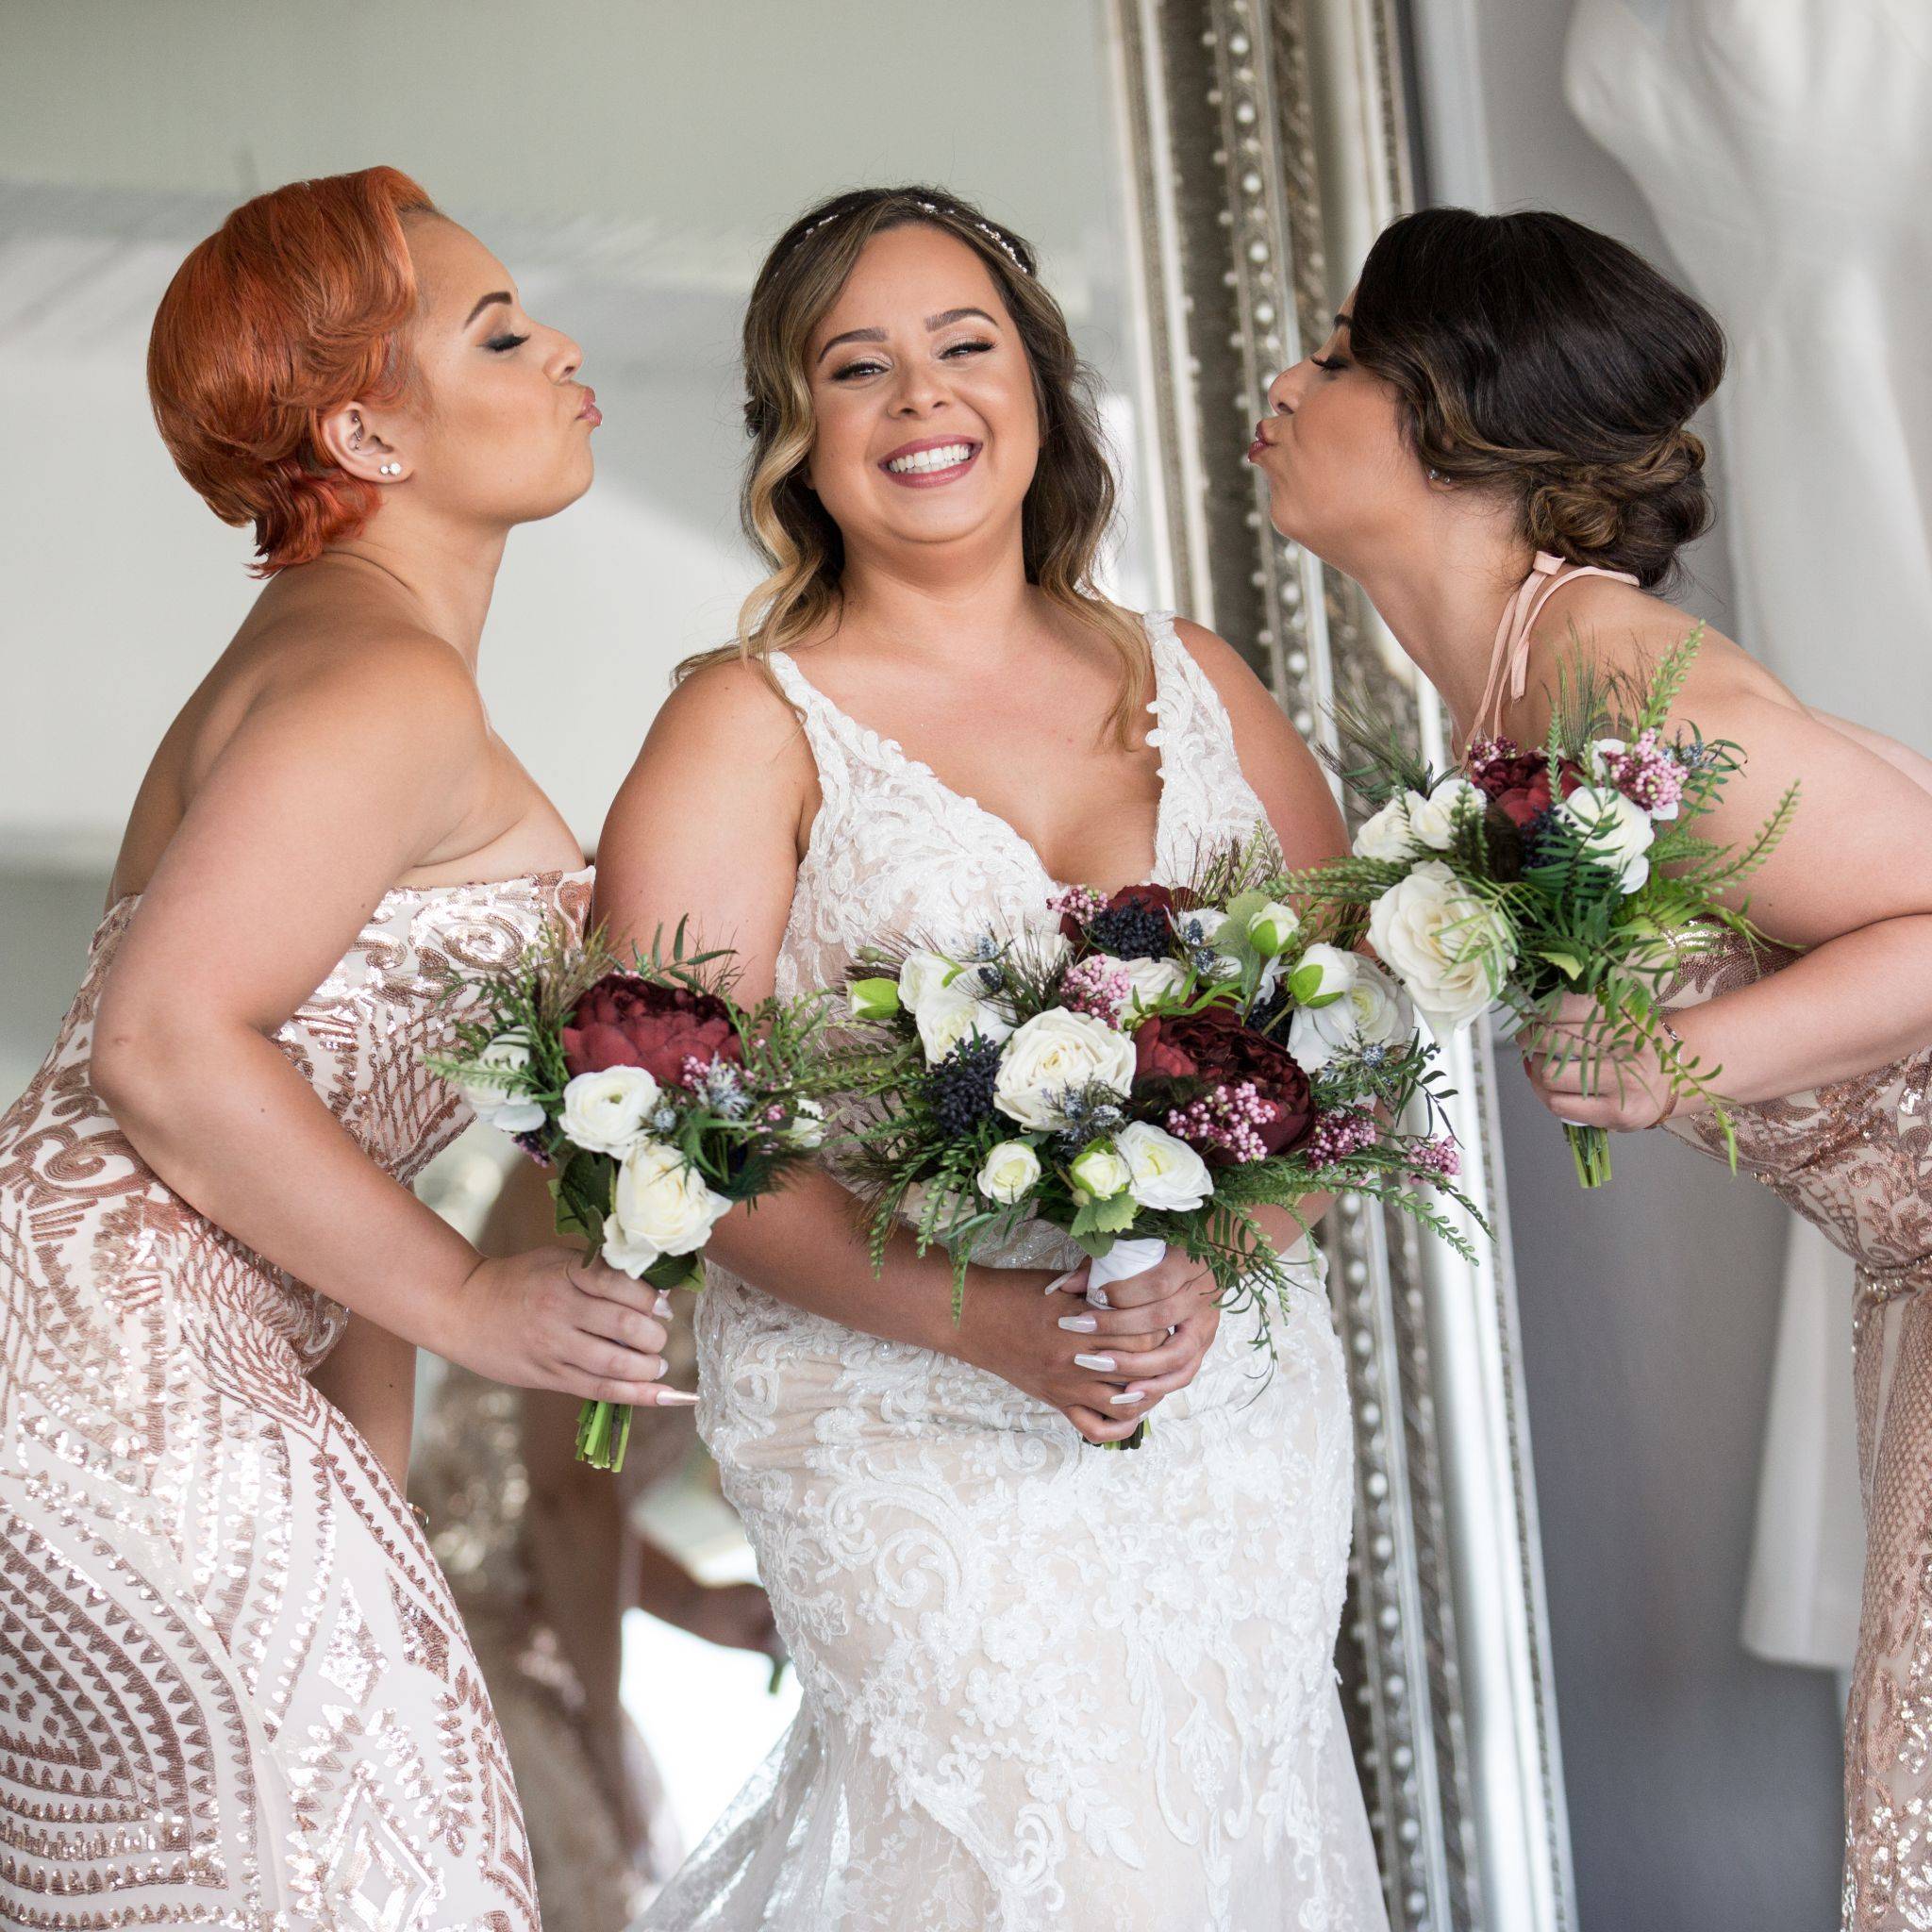 A bride holding her bouquet made of maroon, burgundy, blue and white flowers receives air kisses from her bridesmaids holding smaller bouquets made of the same high quality faux flowers